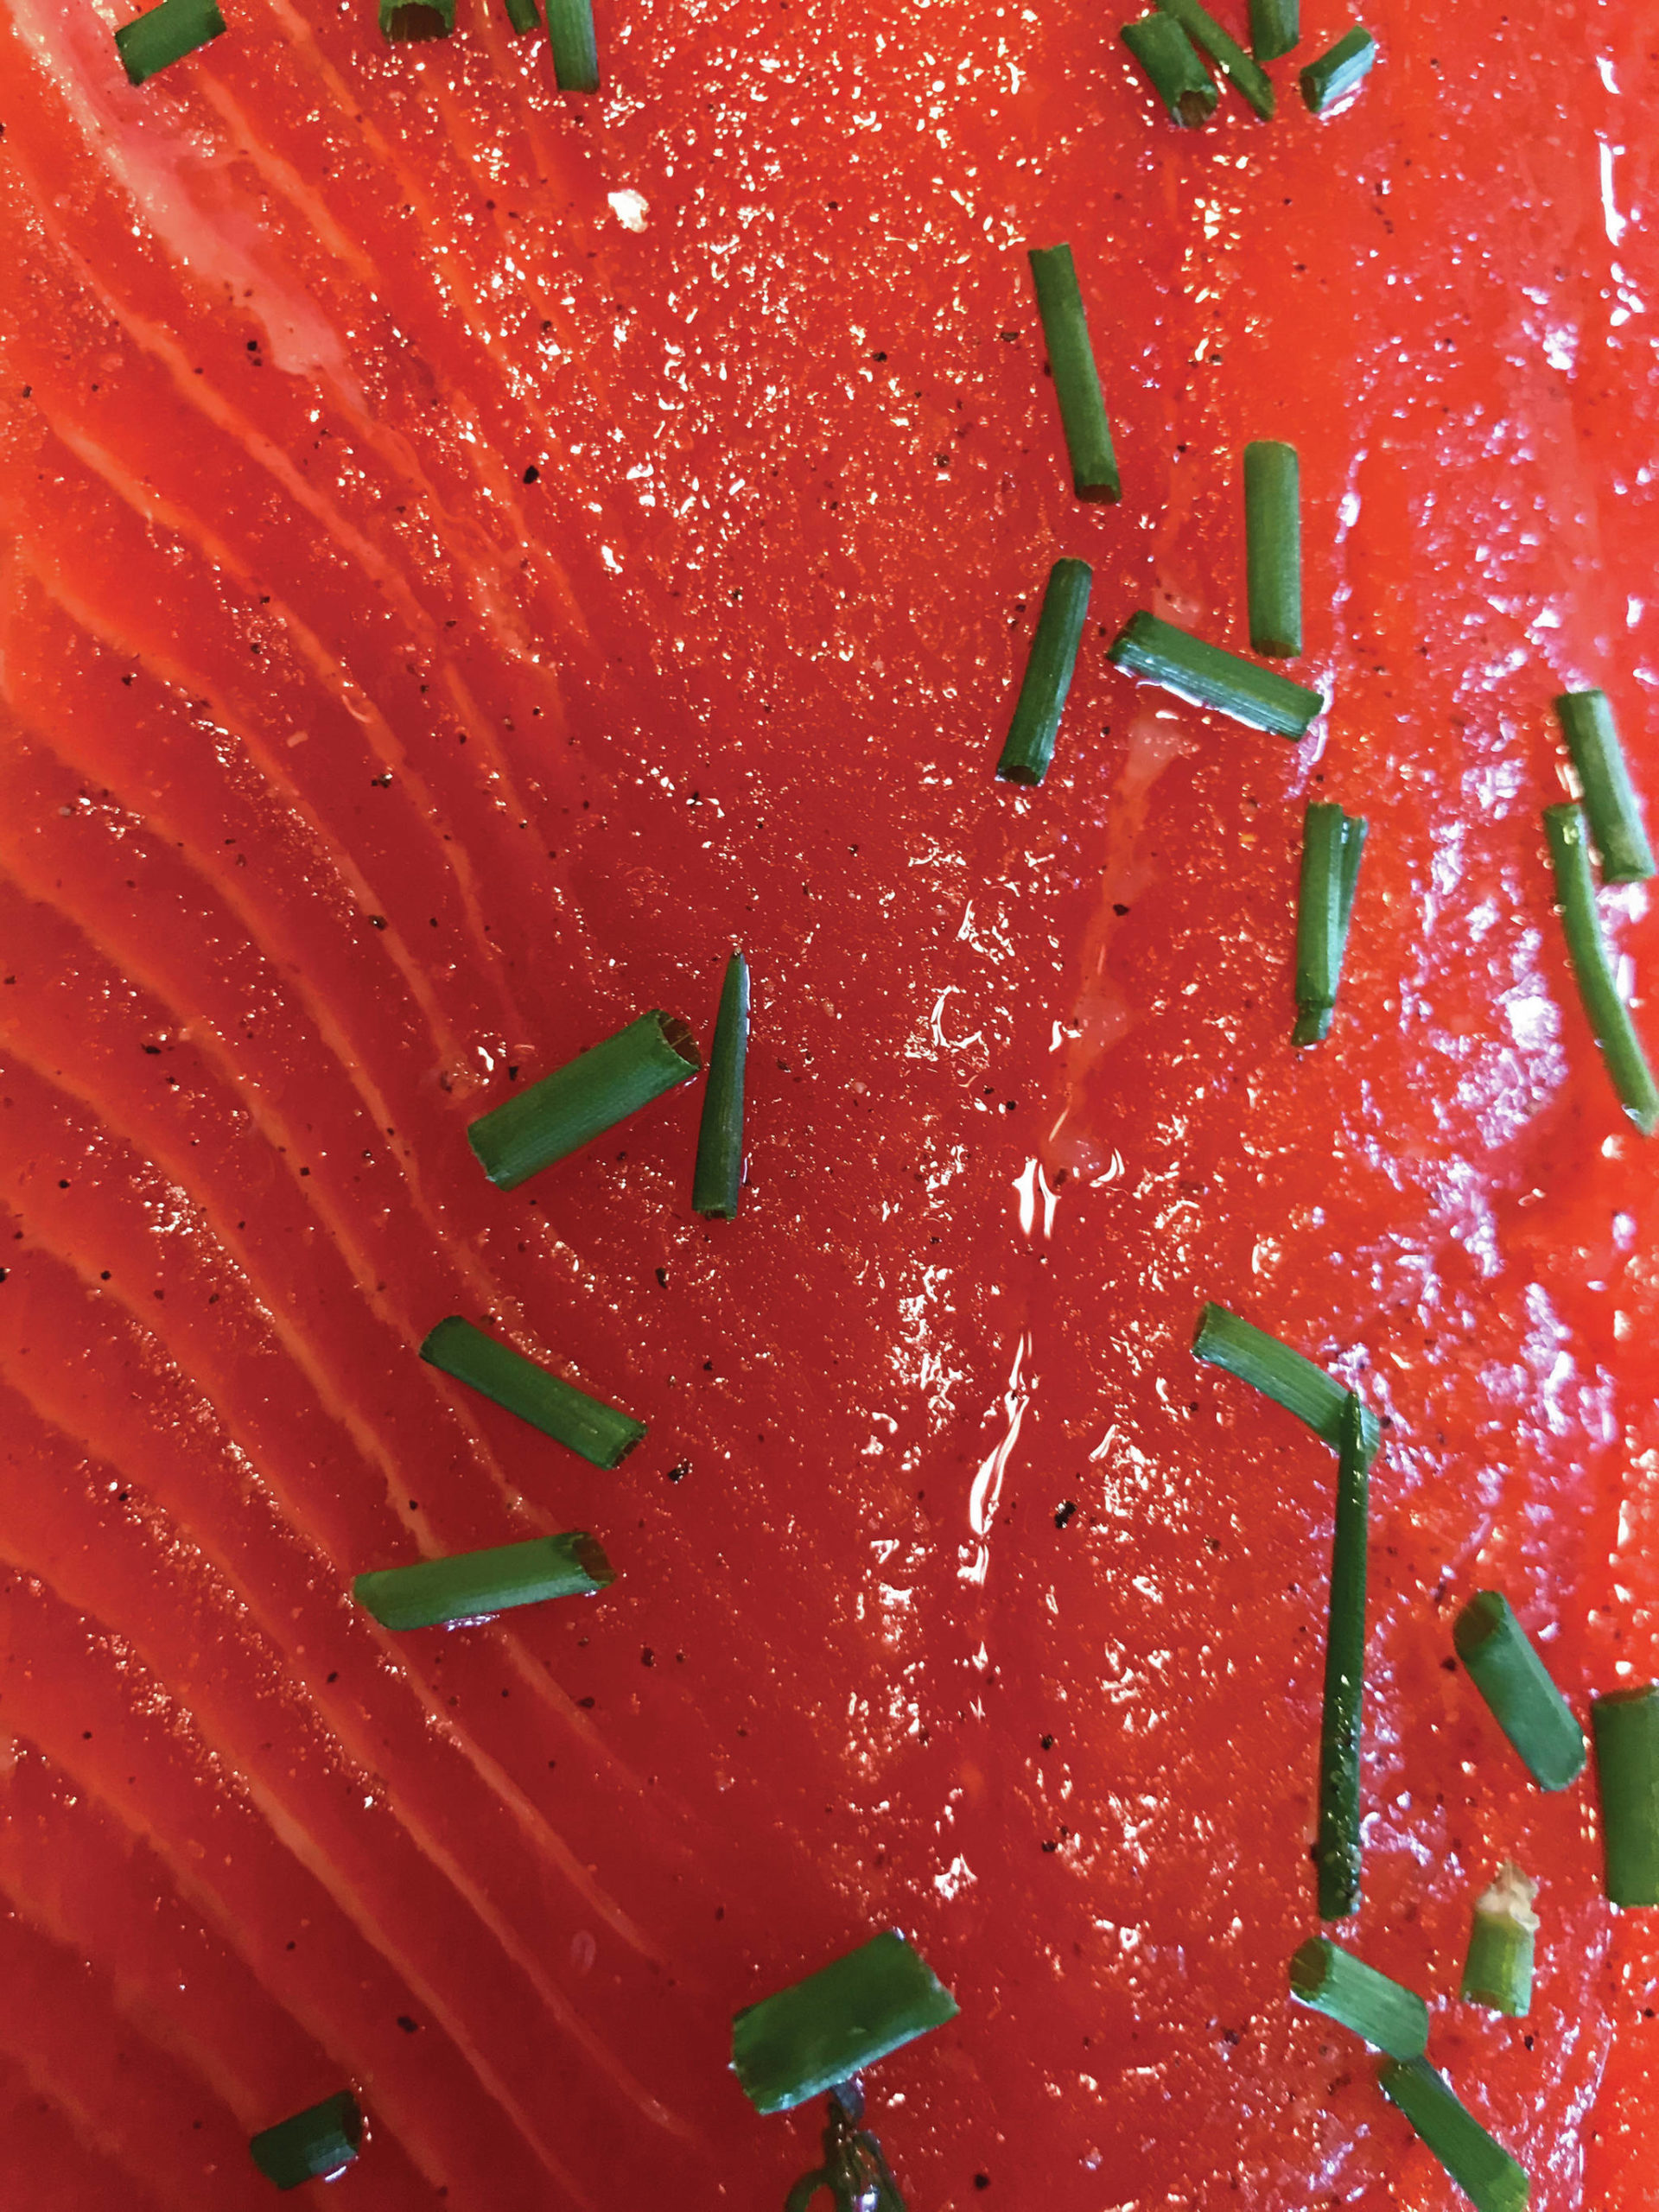 Fresh, sea-bright salmon is the key ingredient to roasted salmon with miso rice and ginger-scallion vinaigrette, as seen here on Wednesday, June 24, 2020, in Teri Robl’s Homer, Alaska kitchen. (Photo by Teri Robl)